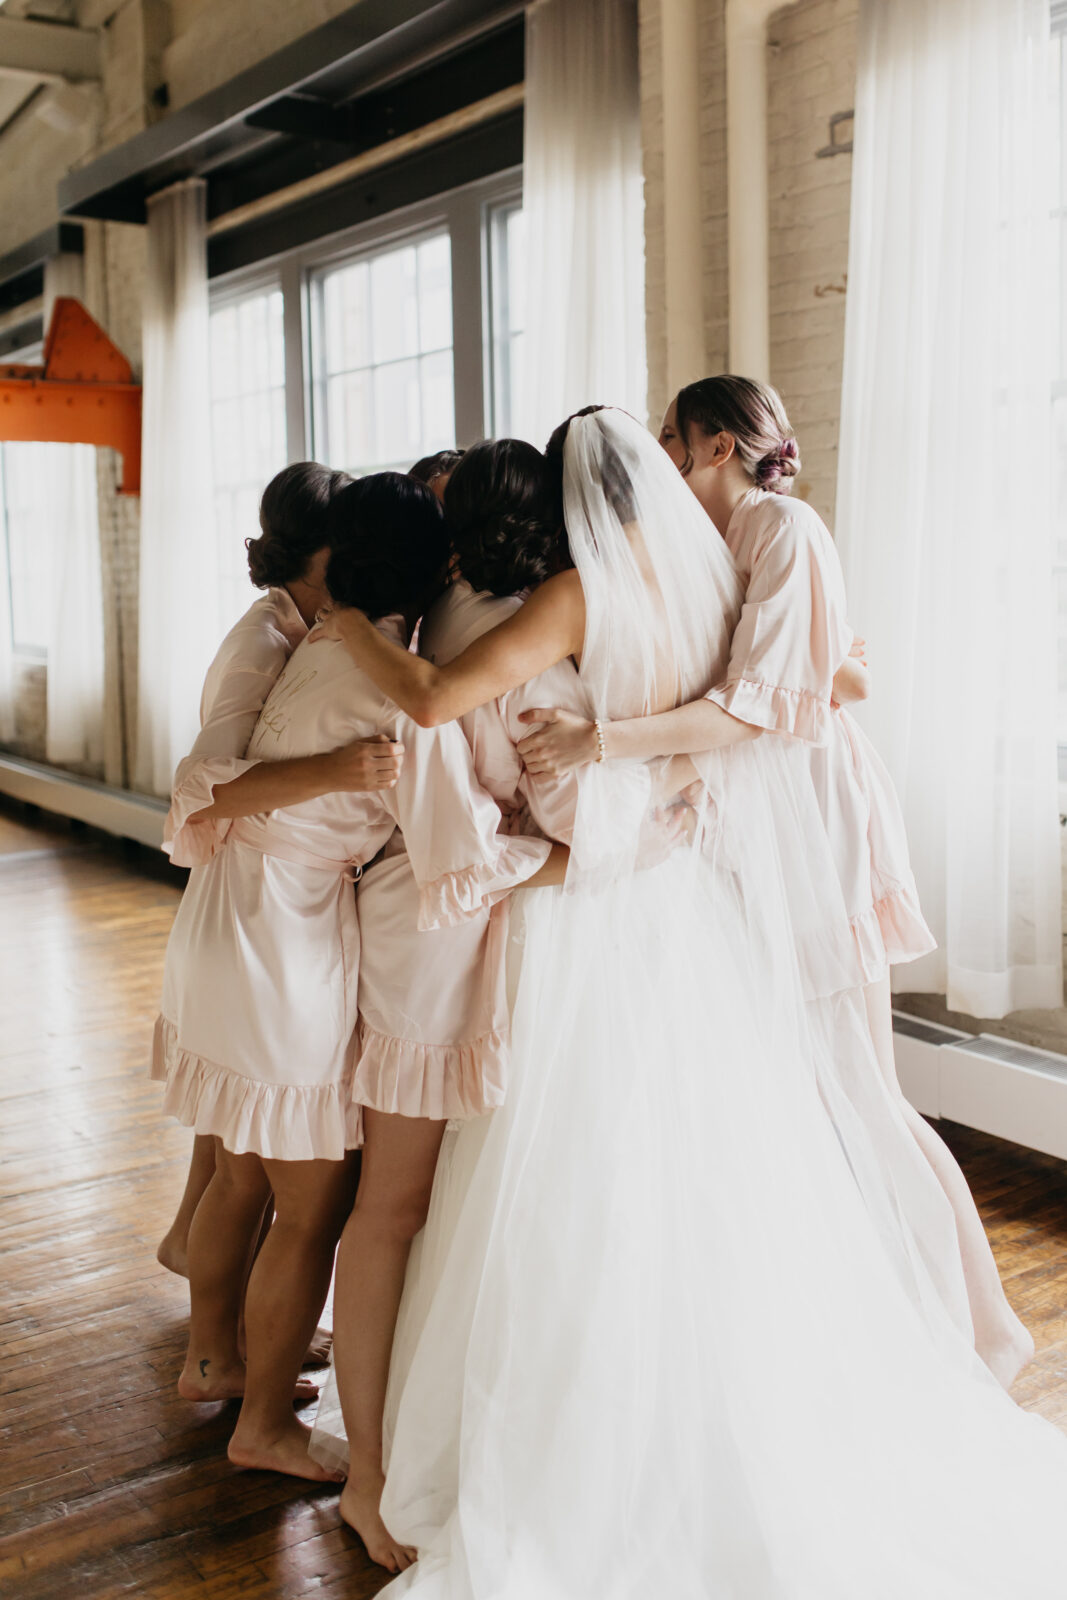 A lovely photo of the bride and her bridesmaids hugging each other